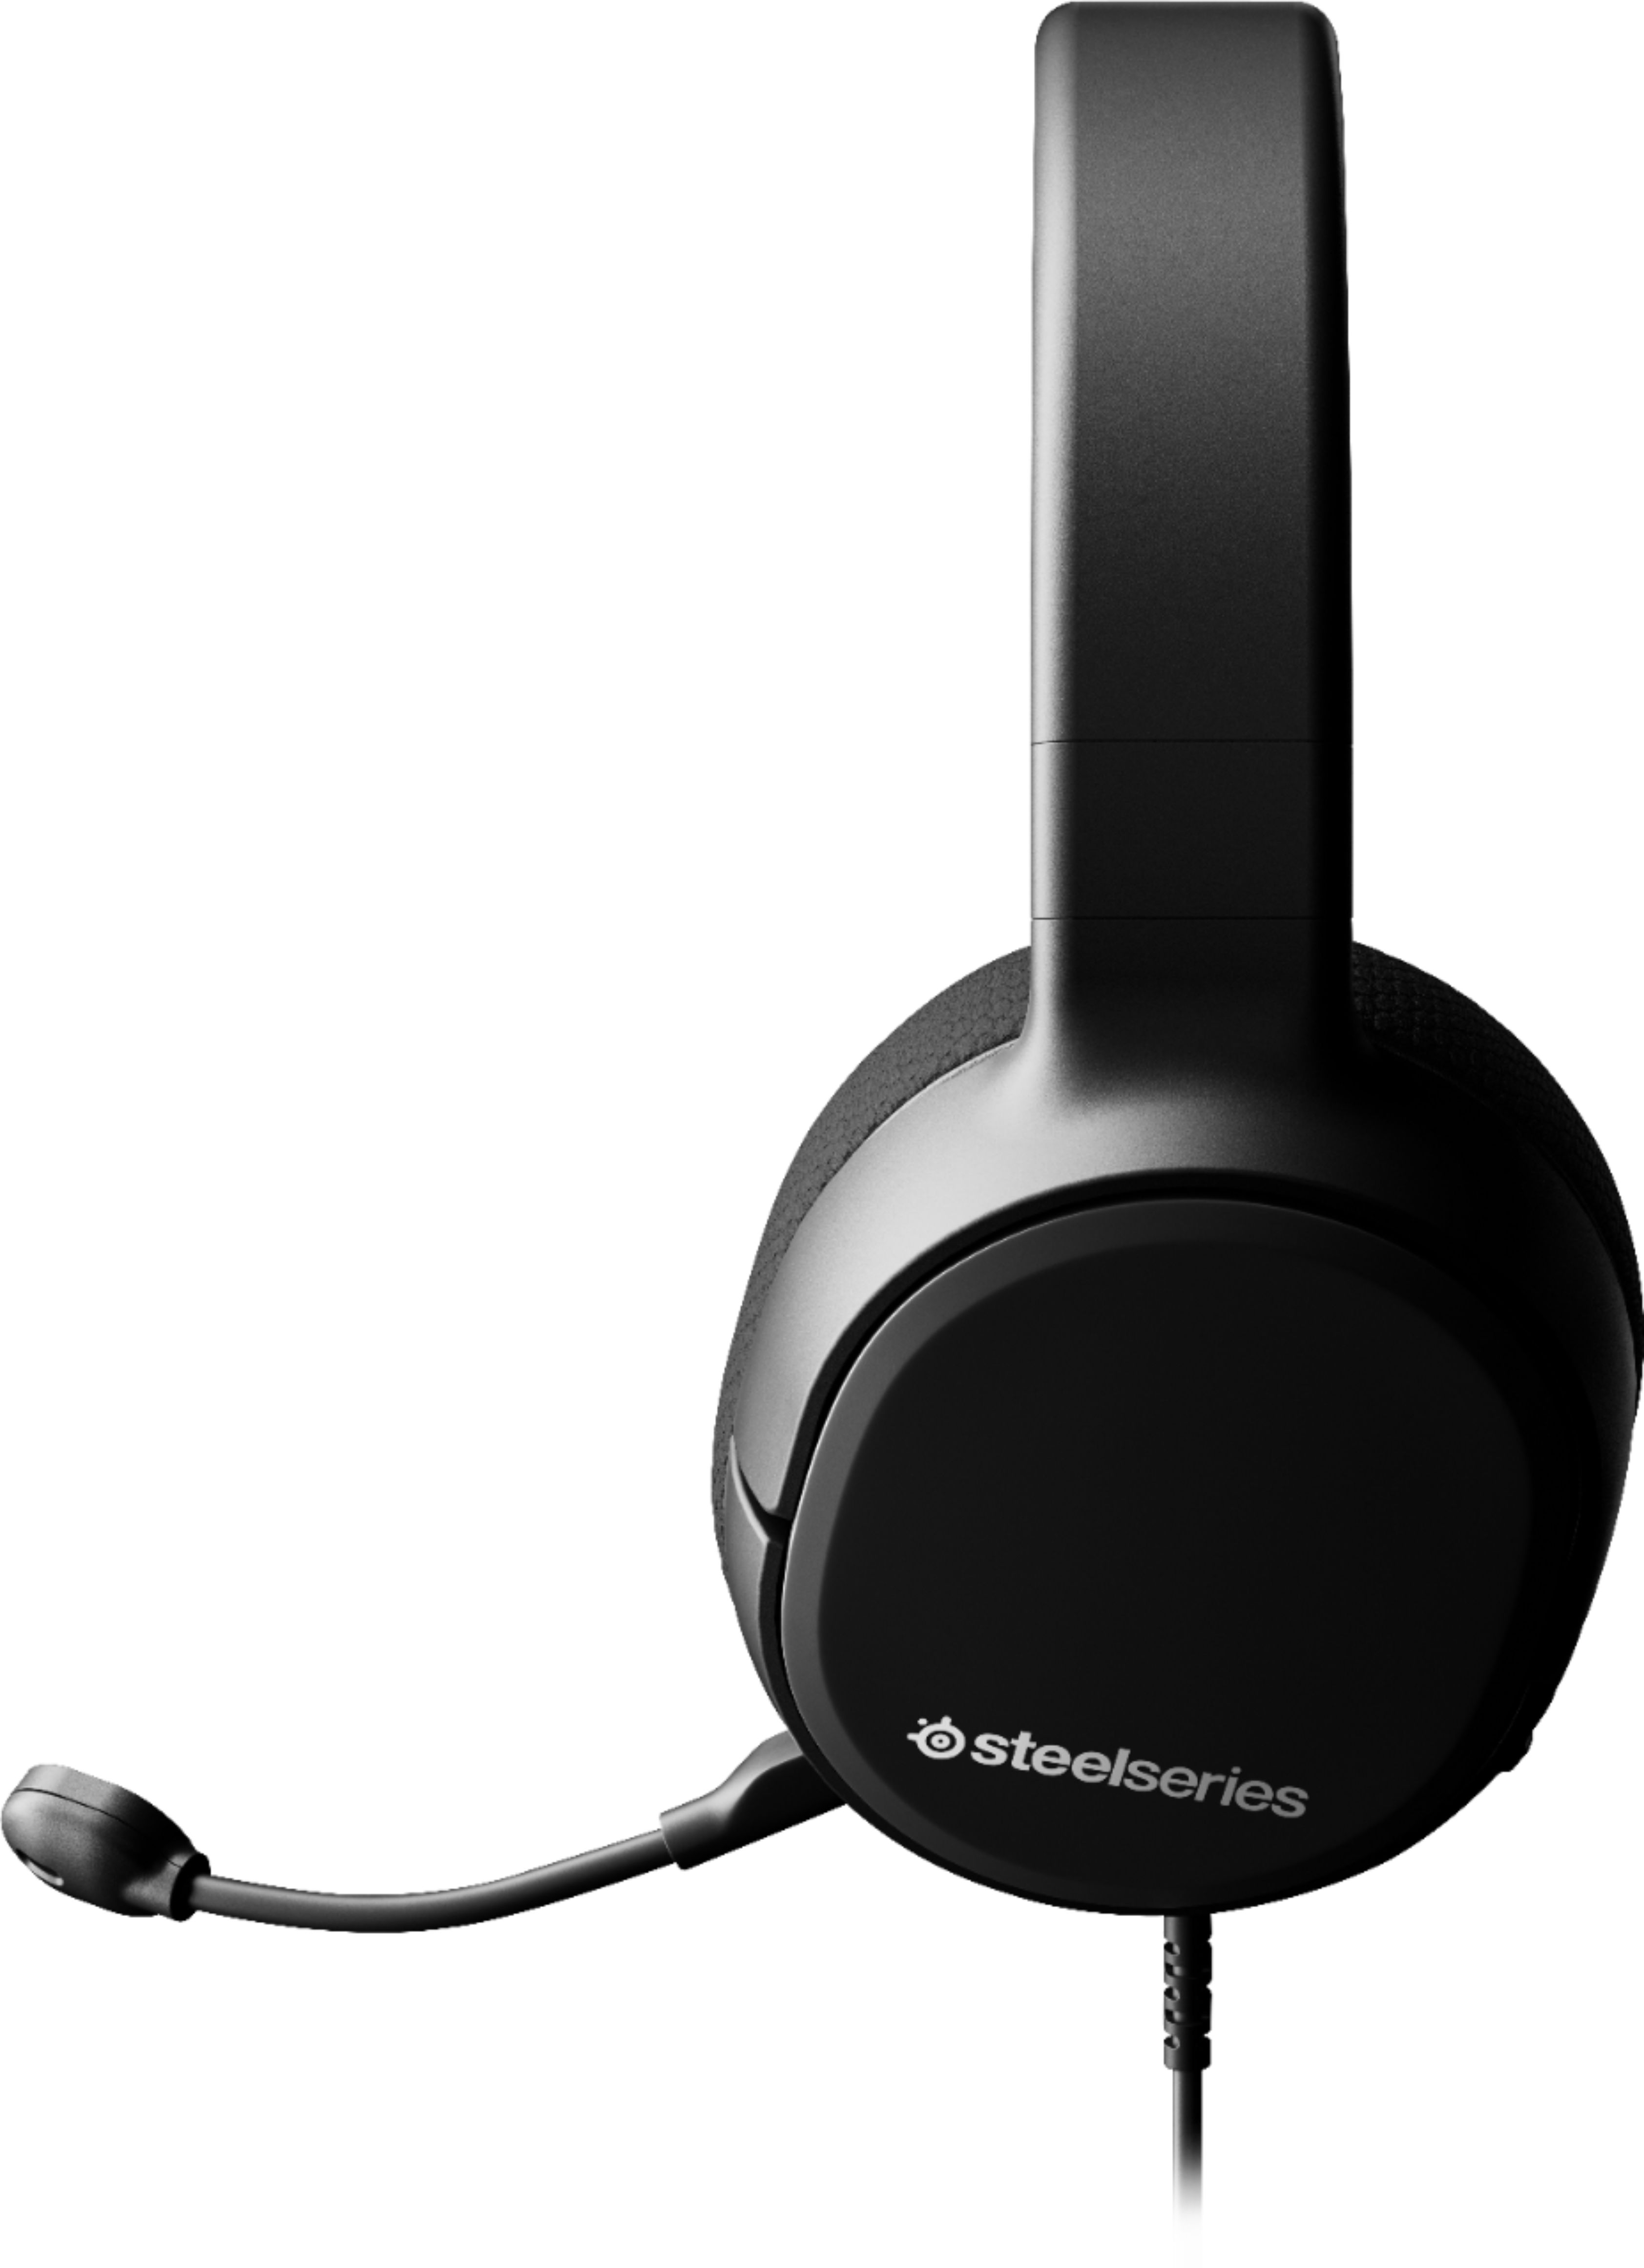 Angle View: SteelSeries - Arctis 1 Wired Gaming Headset for Xbox X|S, and Xbox One - Black